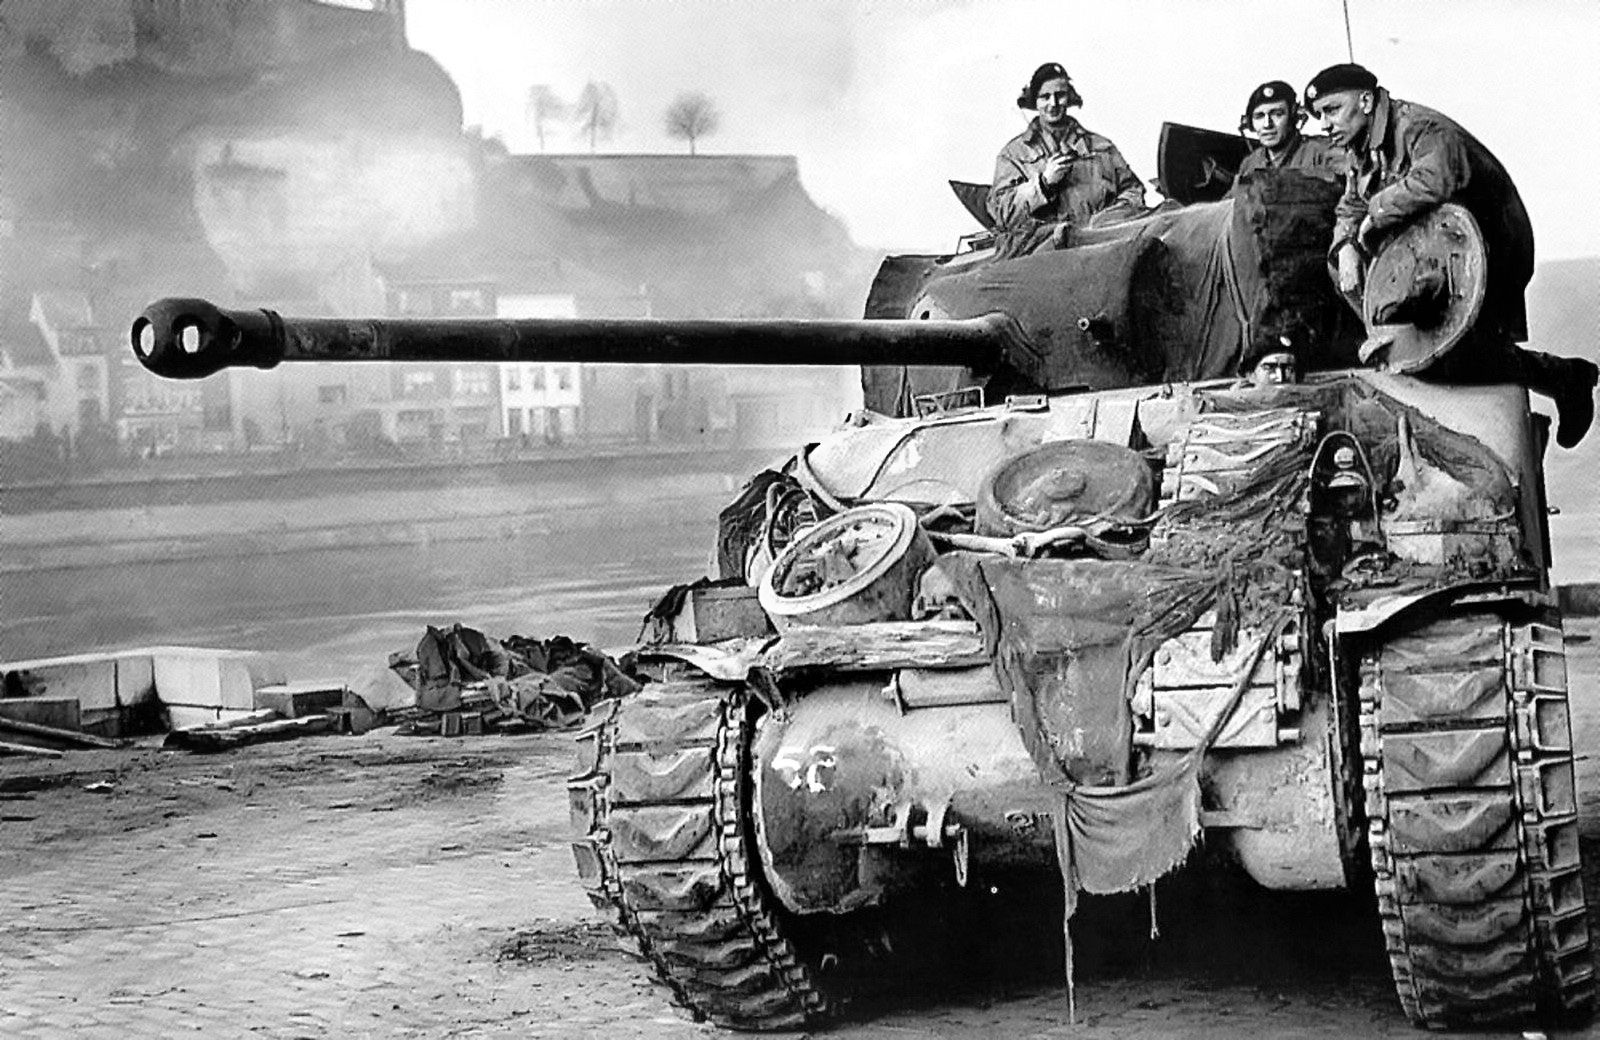 Crewmen pause in the chassis and turret of a Sherman Firefly tank of the British Coldstream Guards during the ground advance into the Netherlands. Six Fireflies, modified from the original Sherman configuration to carry a 17-pounder gun and belonging to the 1st Battalion, Coldstream Guards helped Company B, 505th Parachute Infantry Regiment repulse a German attack on the Heumen Bridge. 